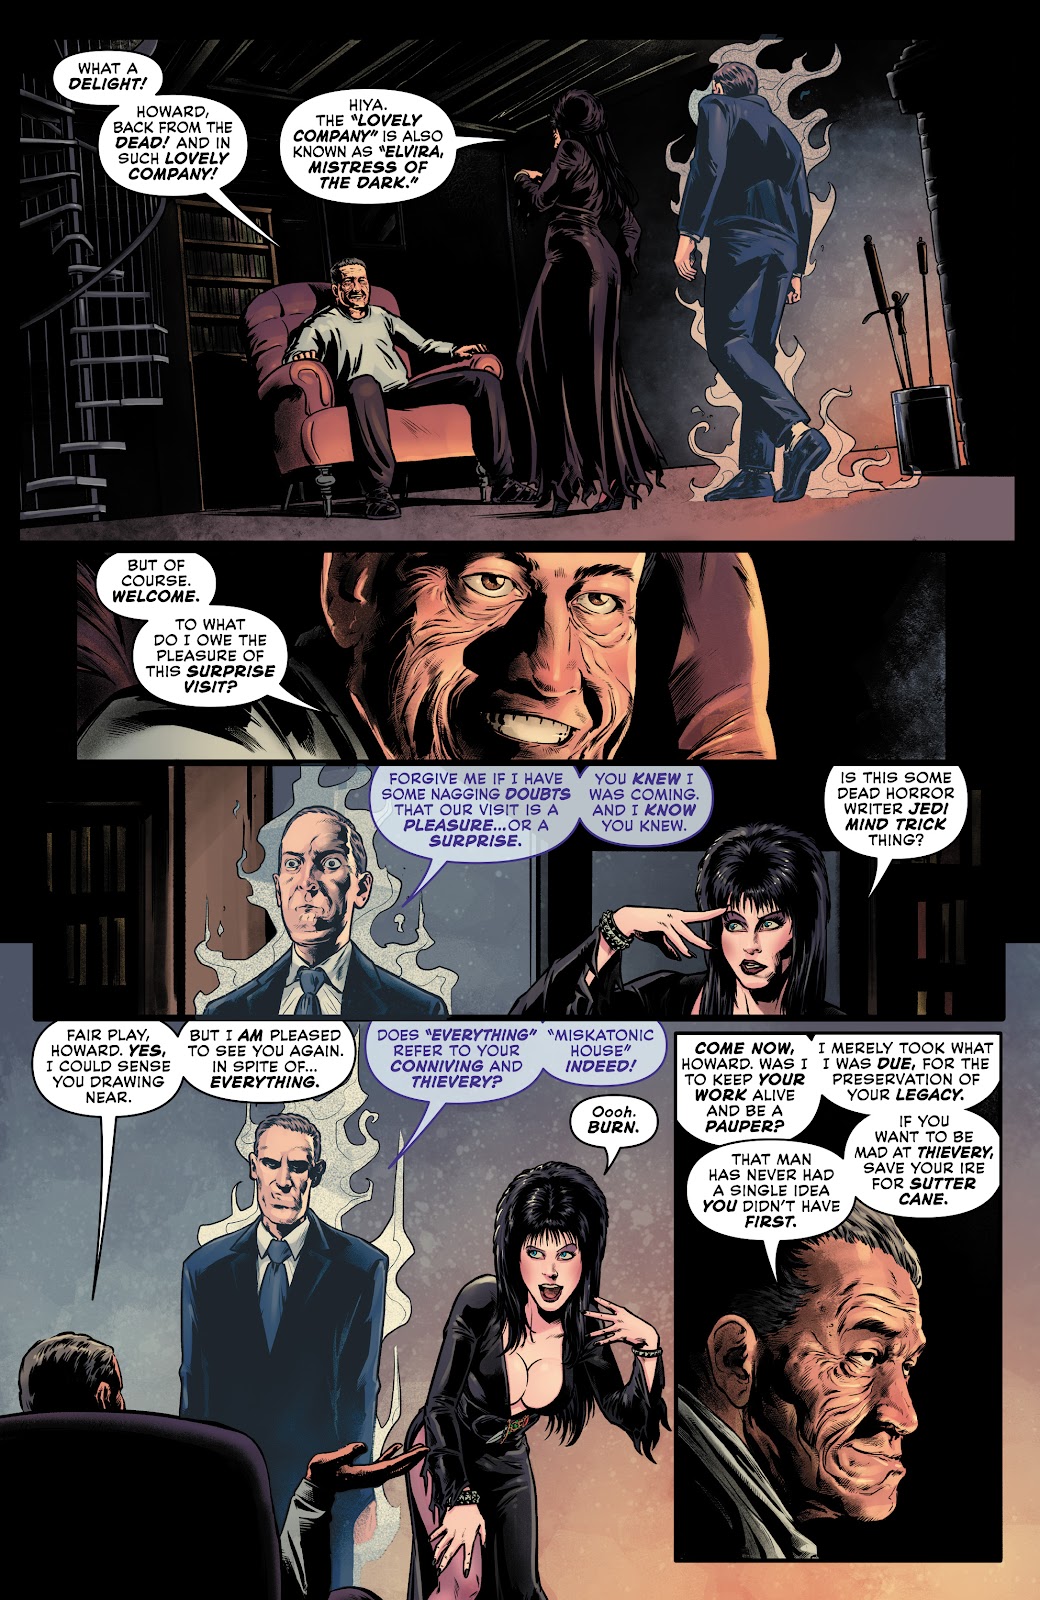 Elvira Meets H.P. Lovecraft issue 3 - Page 13